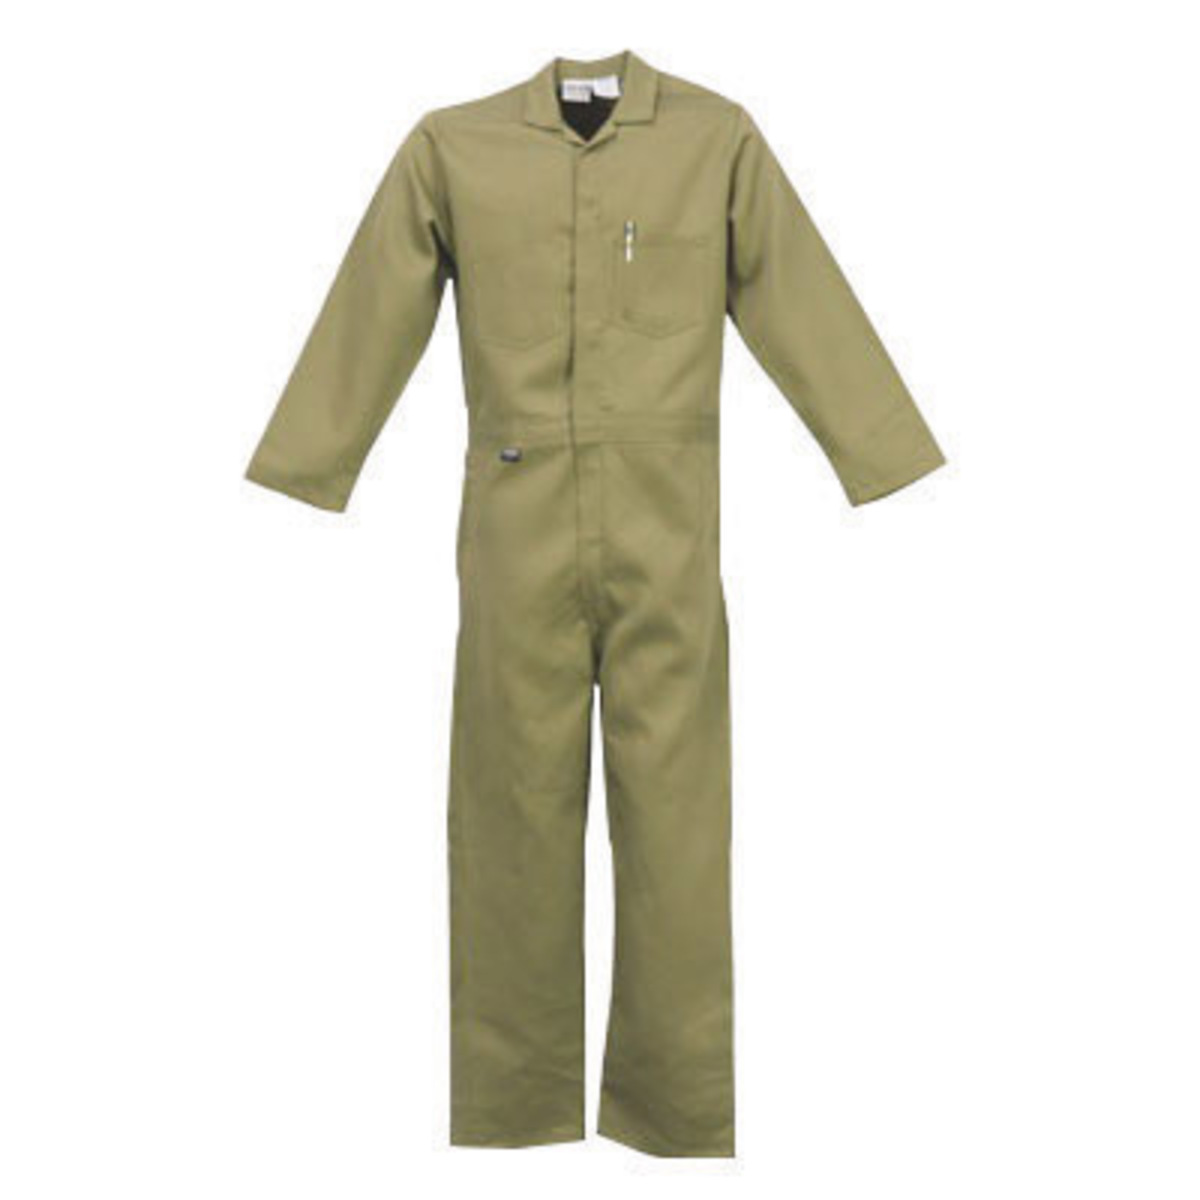 Stanco Safety Products™ Large Tan Indura® UltraSoft® Arc Rated Flame Resistant Coveralls With Front Zipper Closure